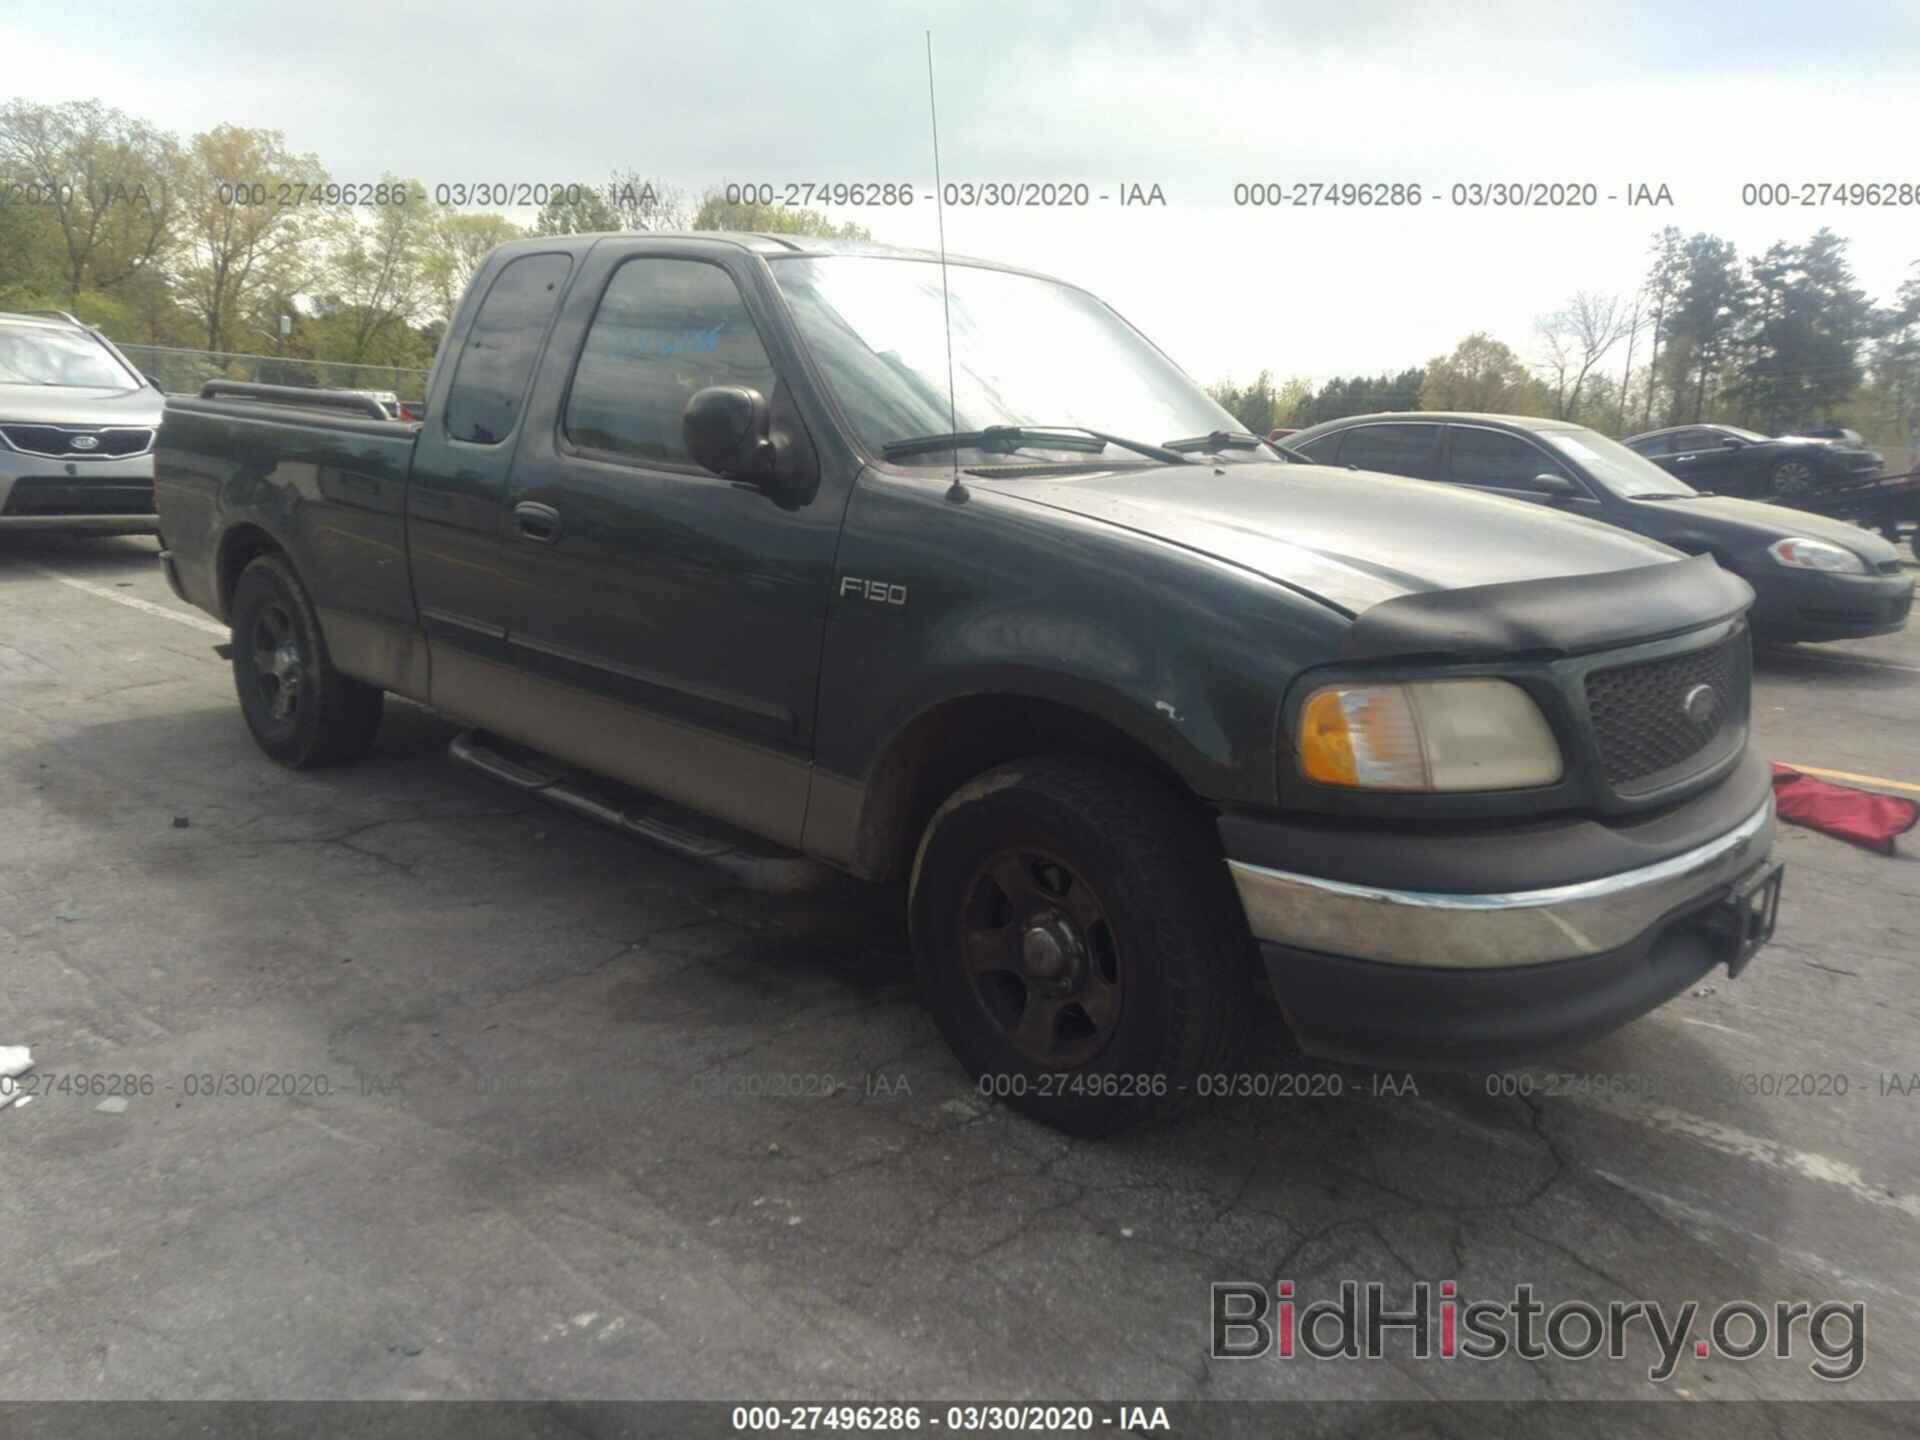 Photo 2FTZX172X1CA43089 - FORD F150 2001